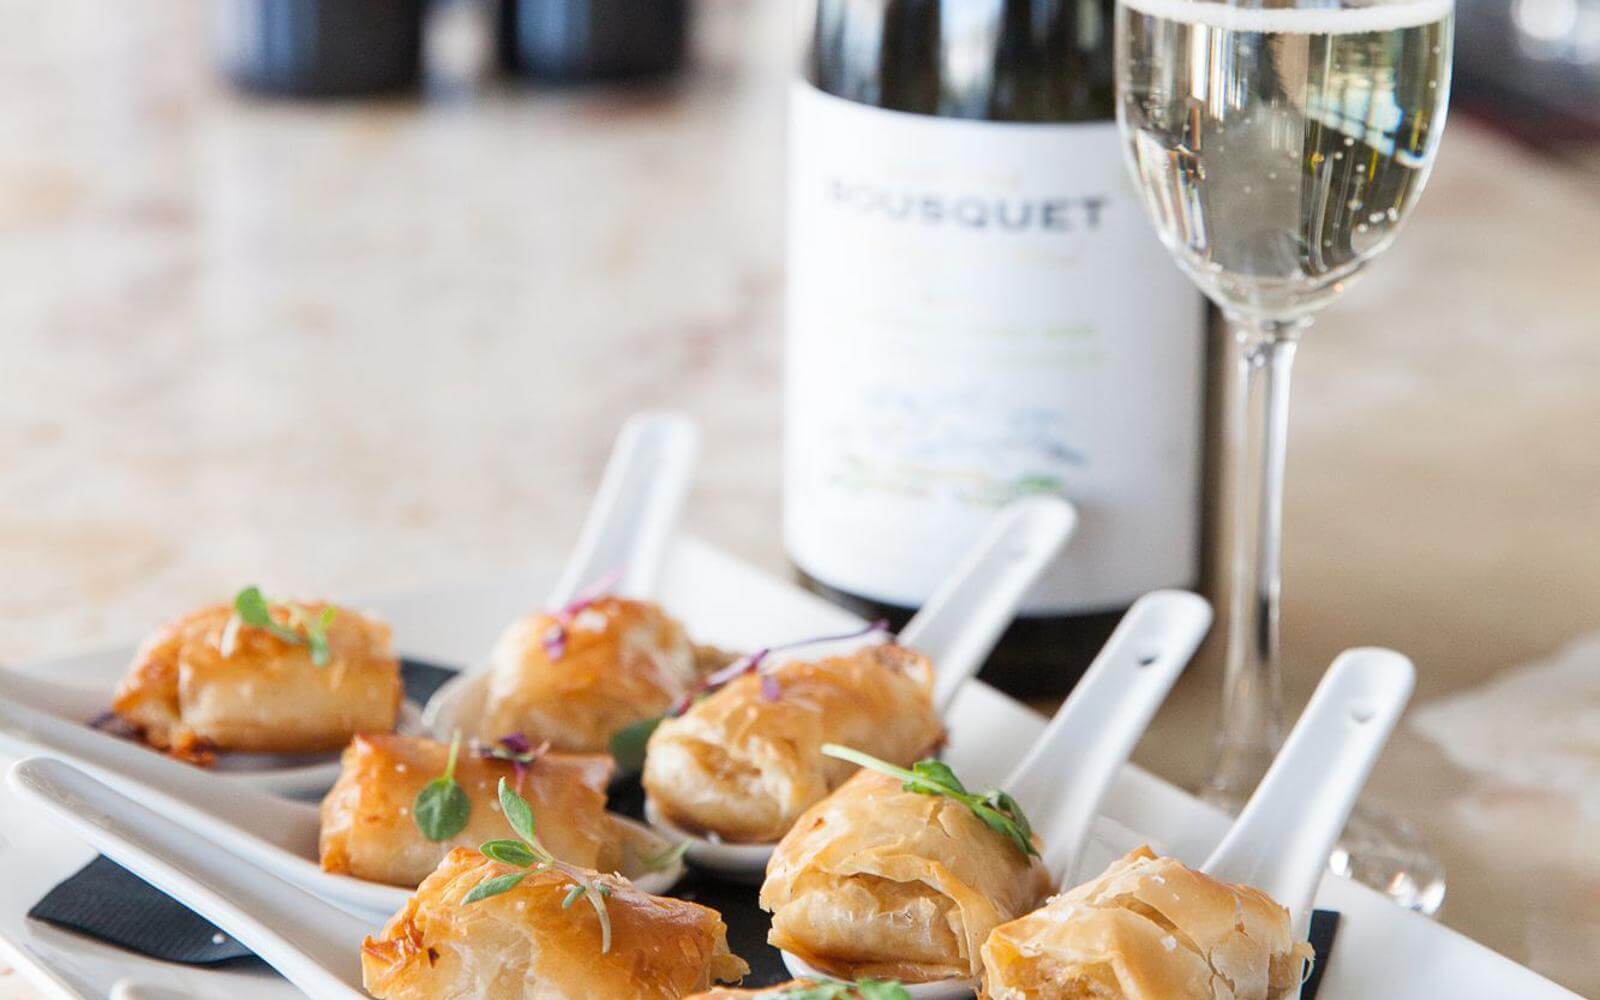 wine and appetizers at the vancouver international wine festival